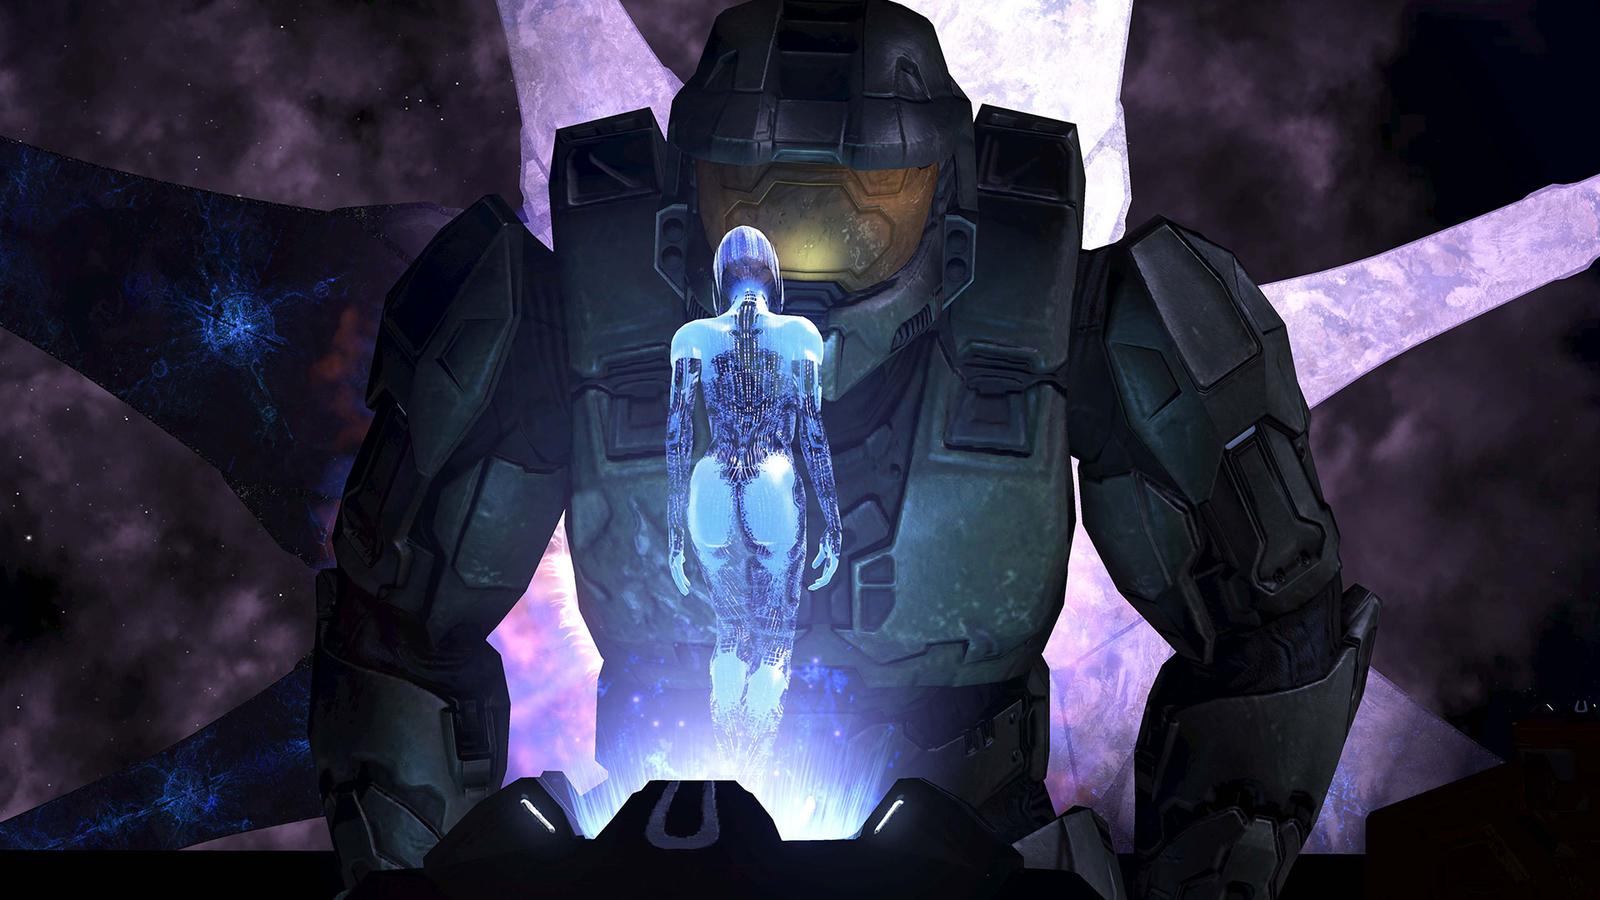 All Halo: The Master Chief Collection games will be out on PC